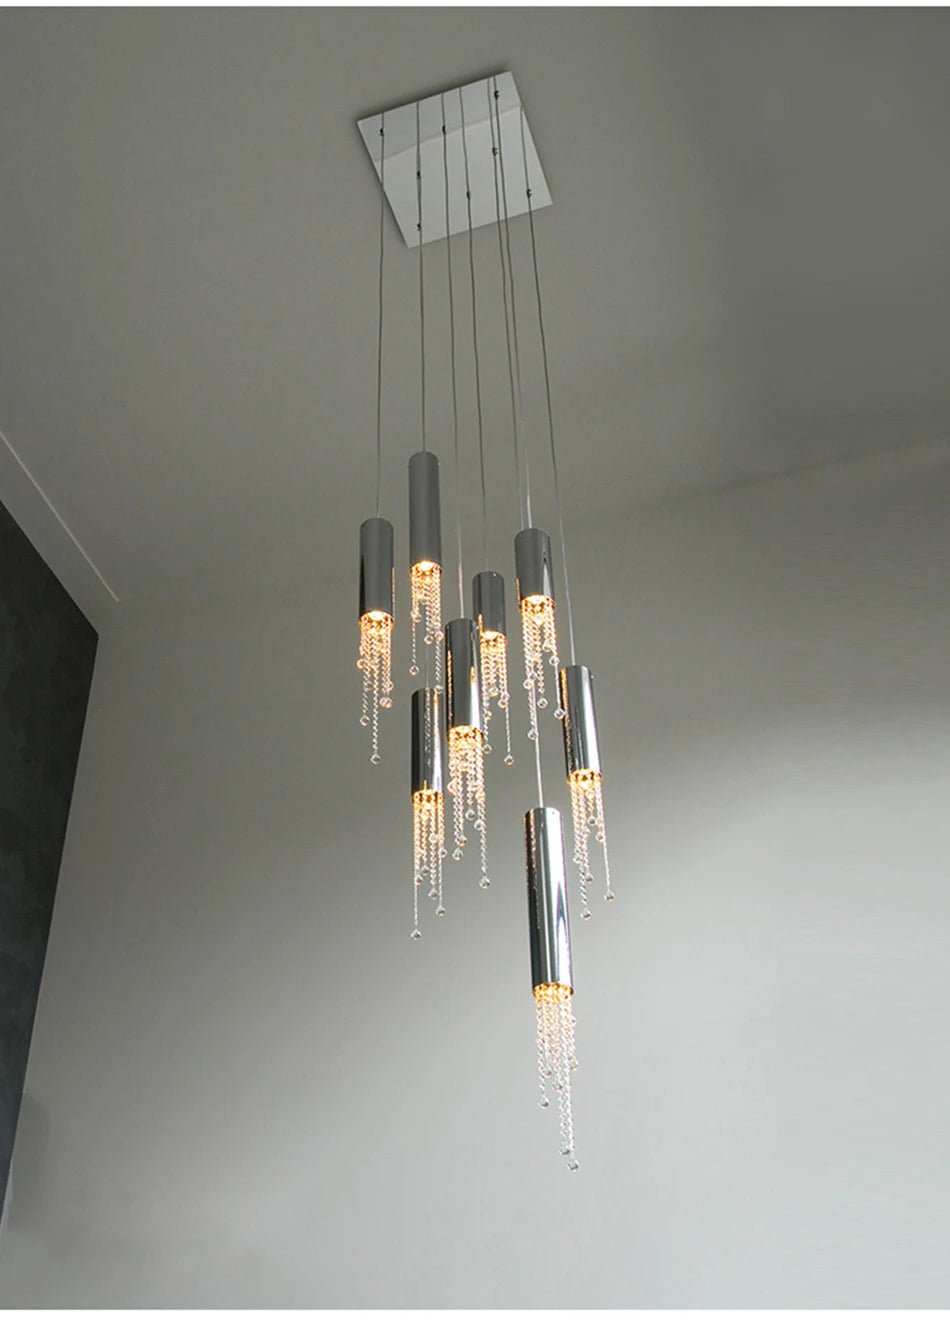 A Canali Modern Crystal Pendant Chandelier from Morsale.com hangs from the ceiling, featuring multiple cylindrical silver lights with warm LEDs. Clear crystals dangle from each cylinder in a cascading fashion, adding an elegant touch to the minimalist interior and enhancing its modern look.